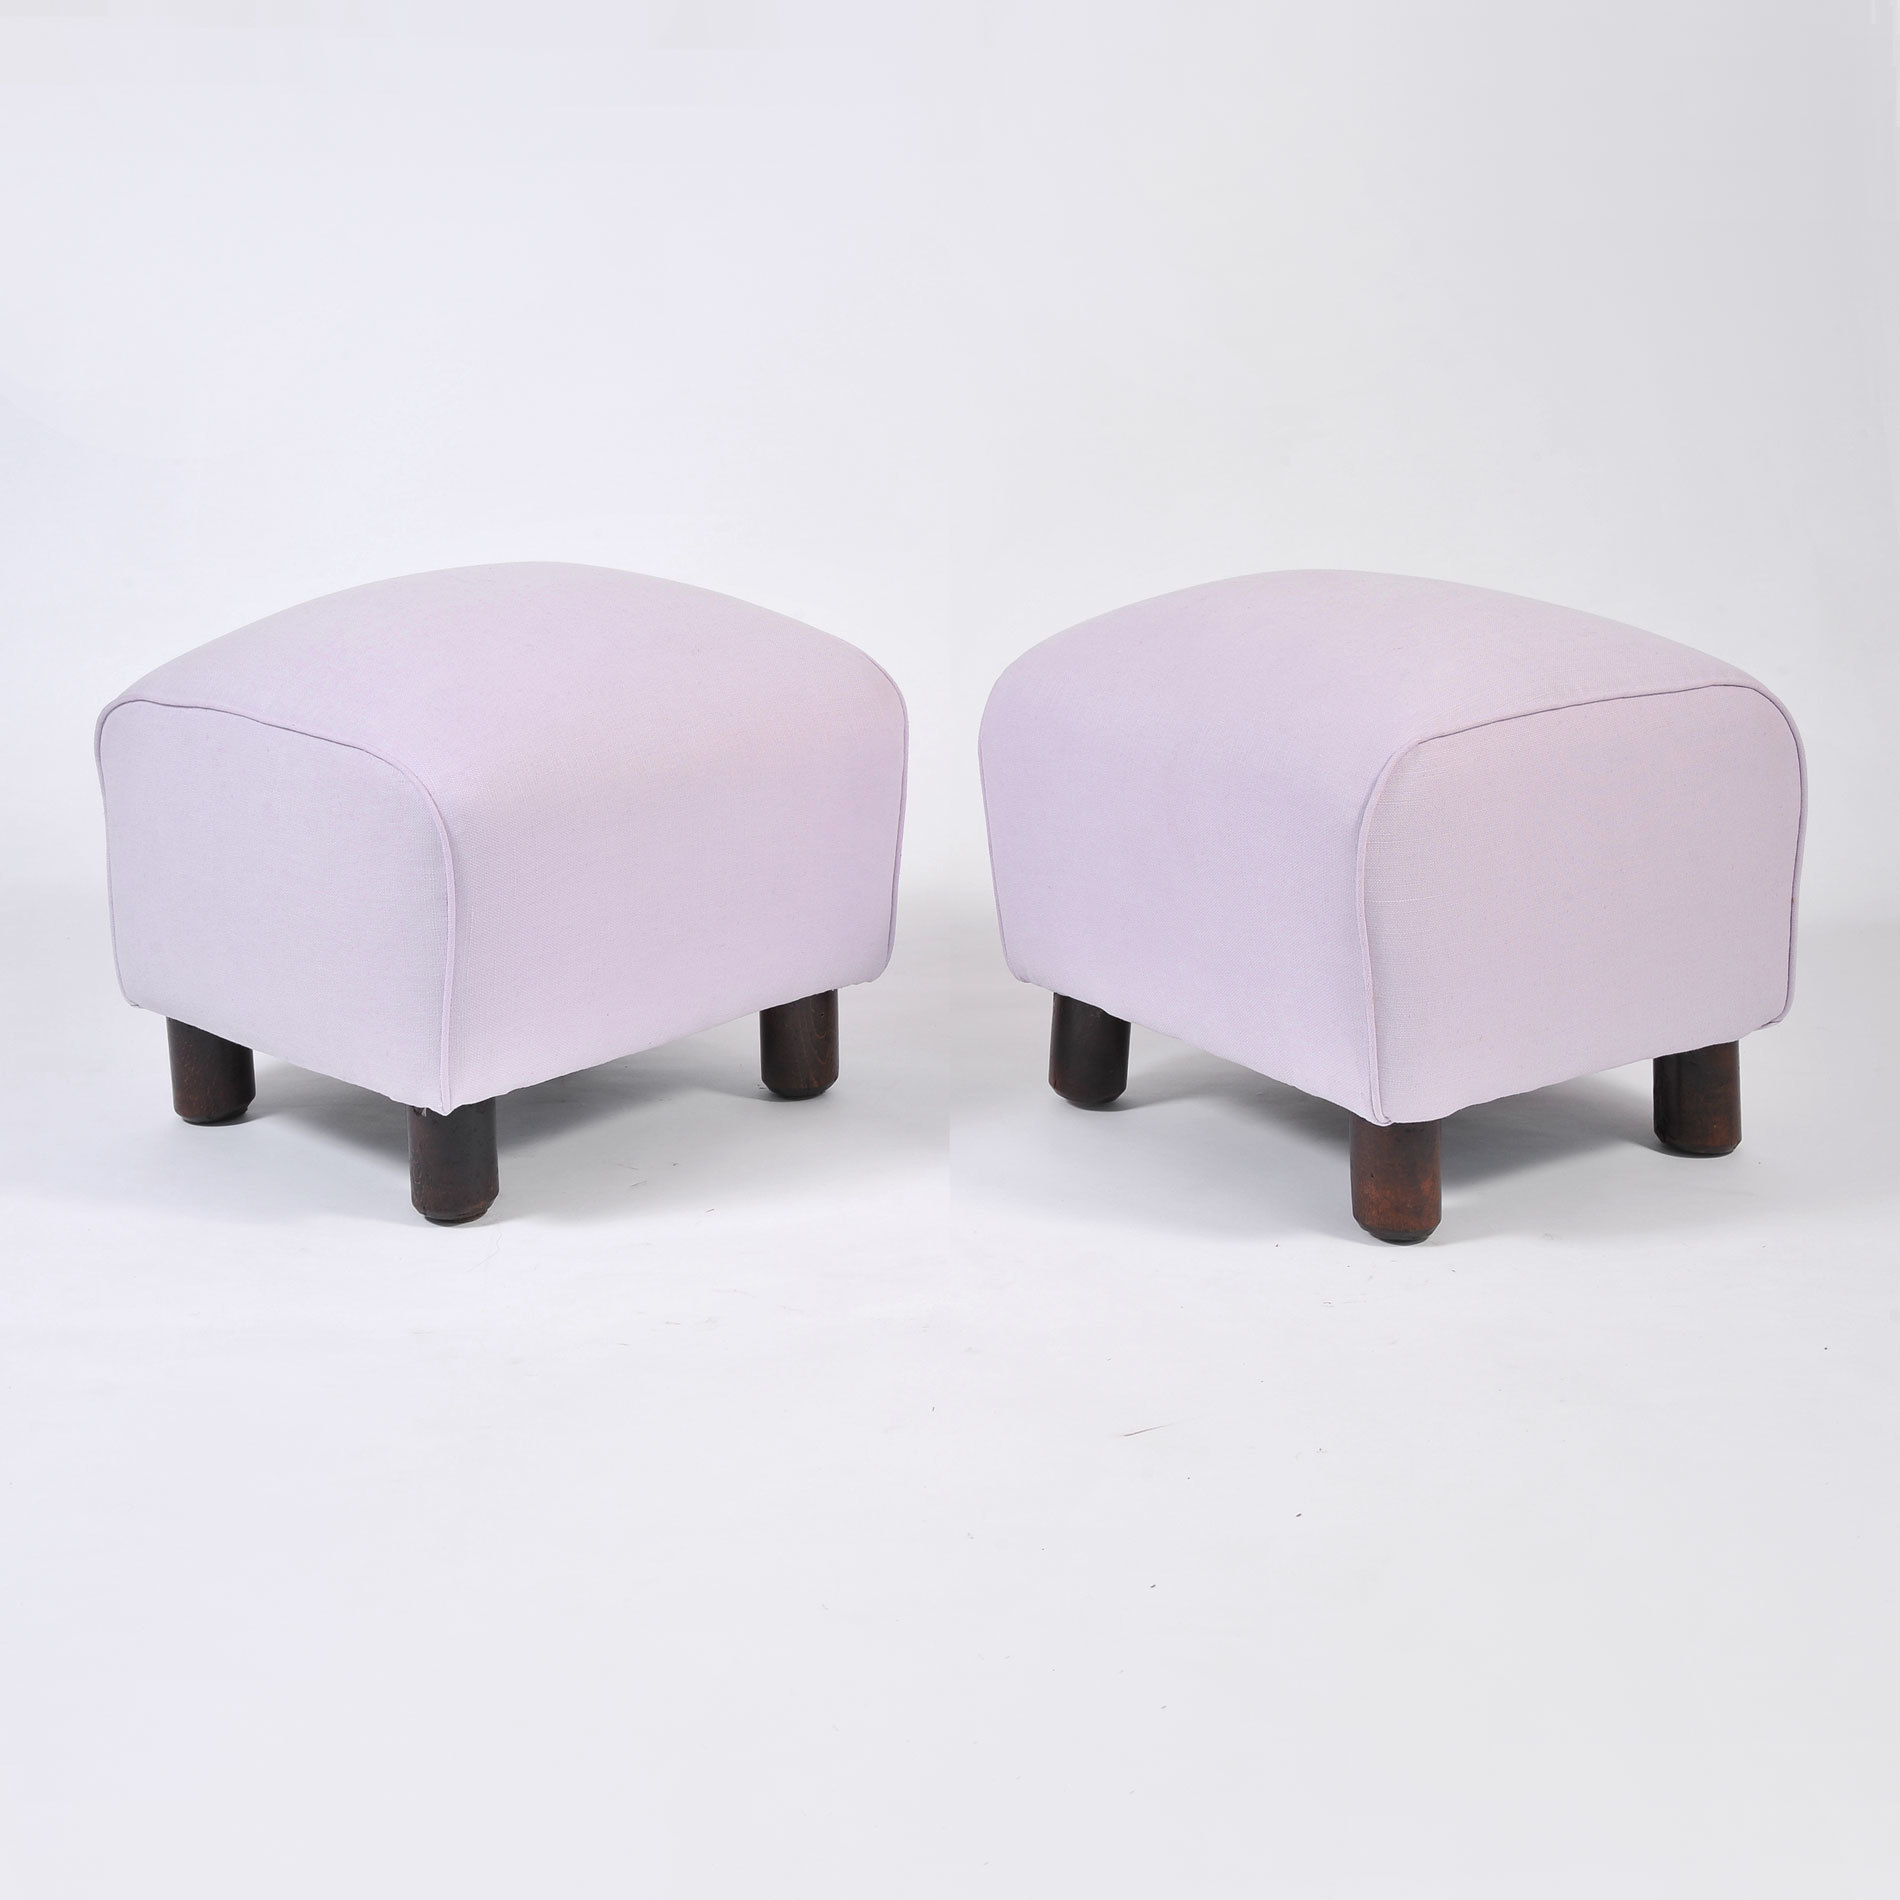 Pair Of Wood Stools In Lilac 01